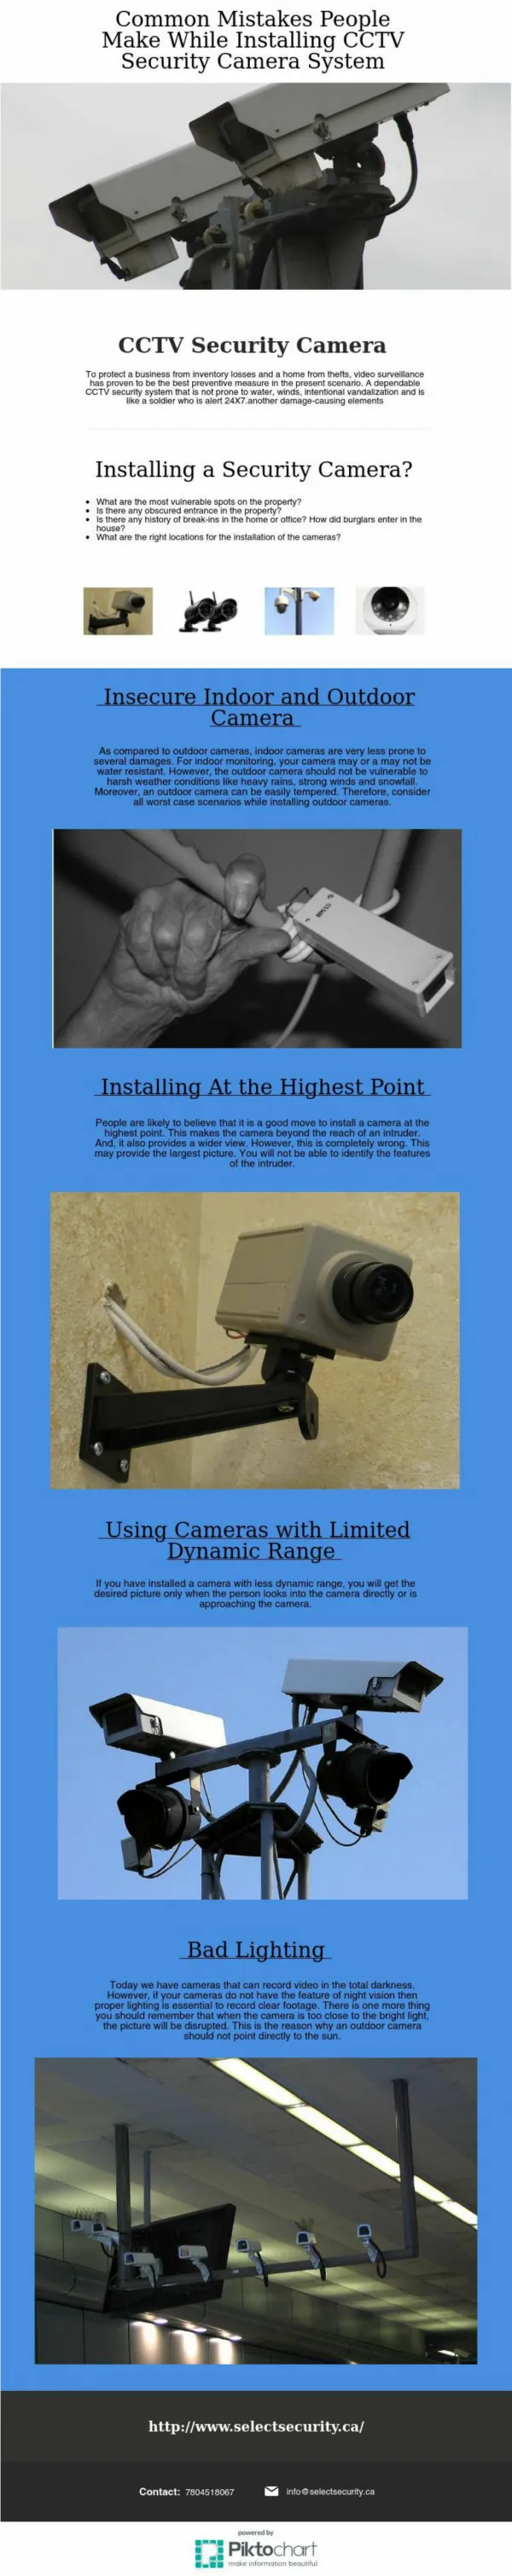 Common Mistakes People Make While Installing CCTV Security Camera System